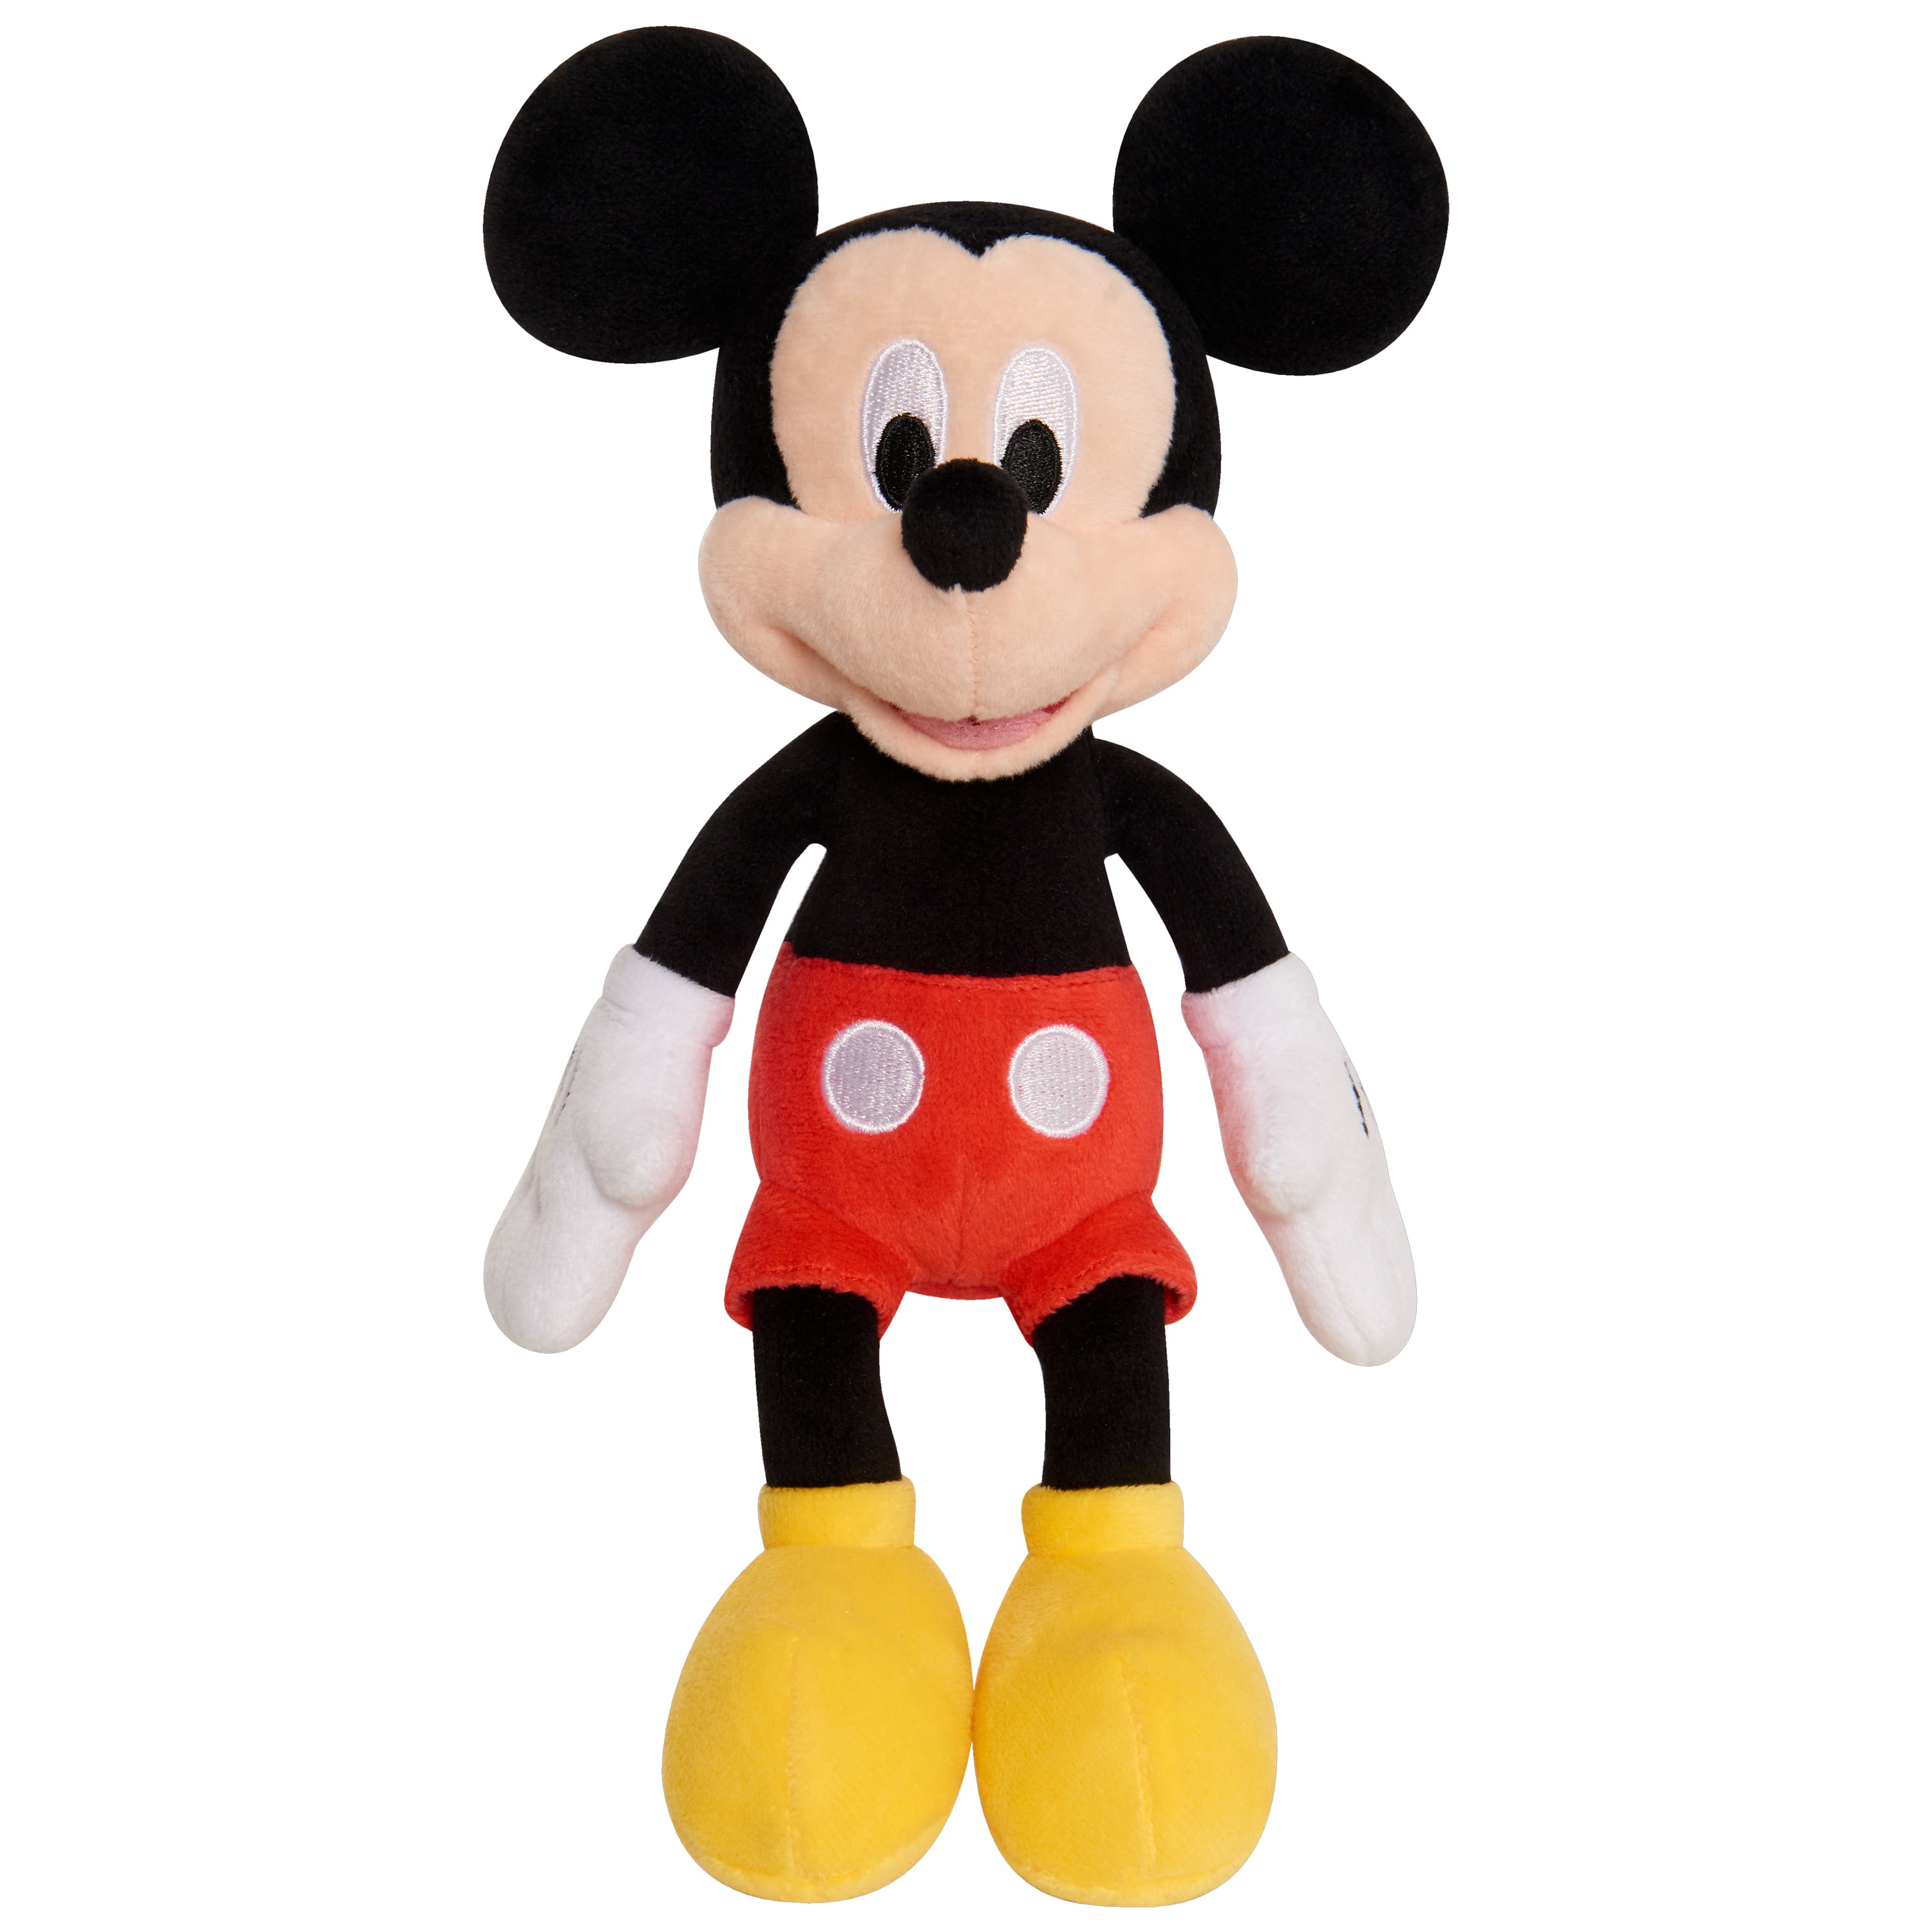 Details about  / I Love NY Mickey Ears Disney Store New with tags Adult IN HAND